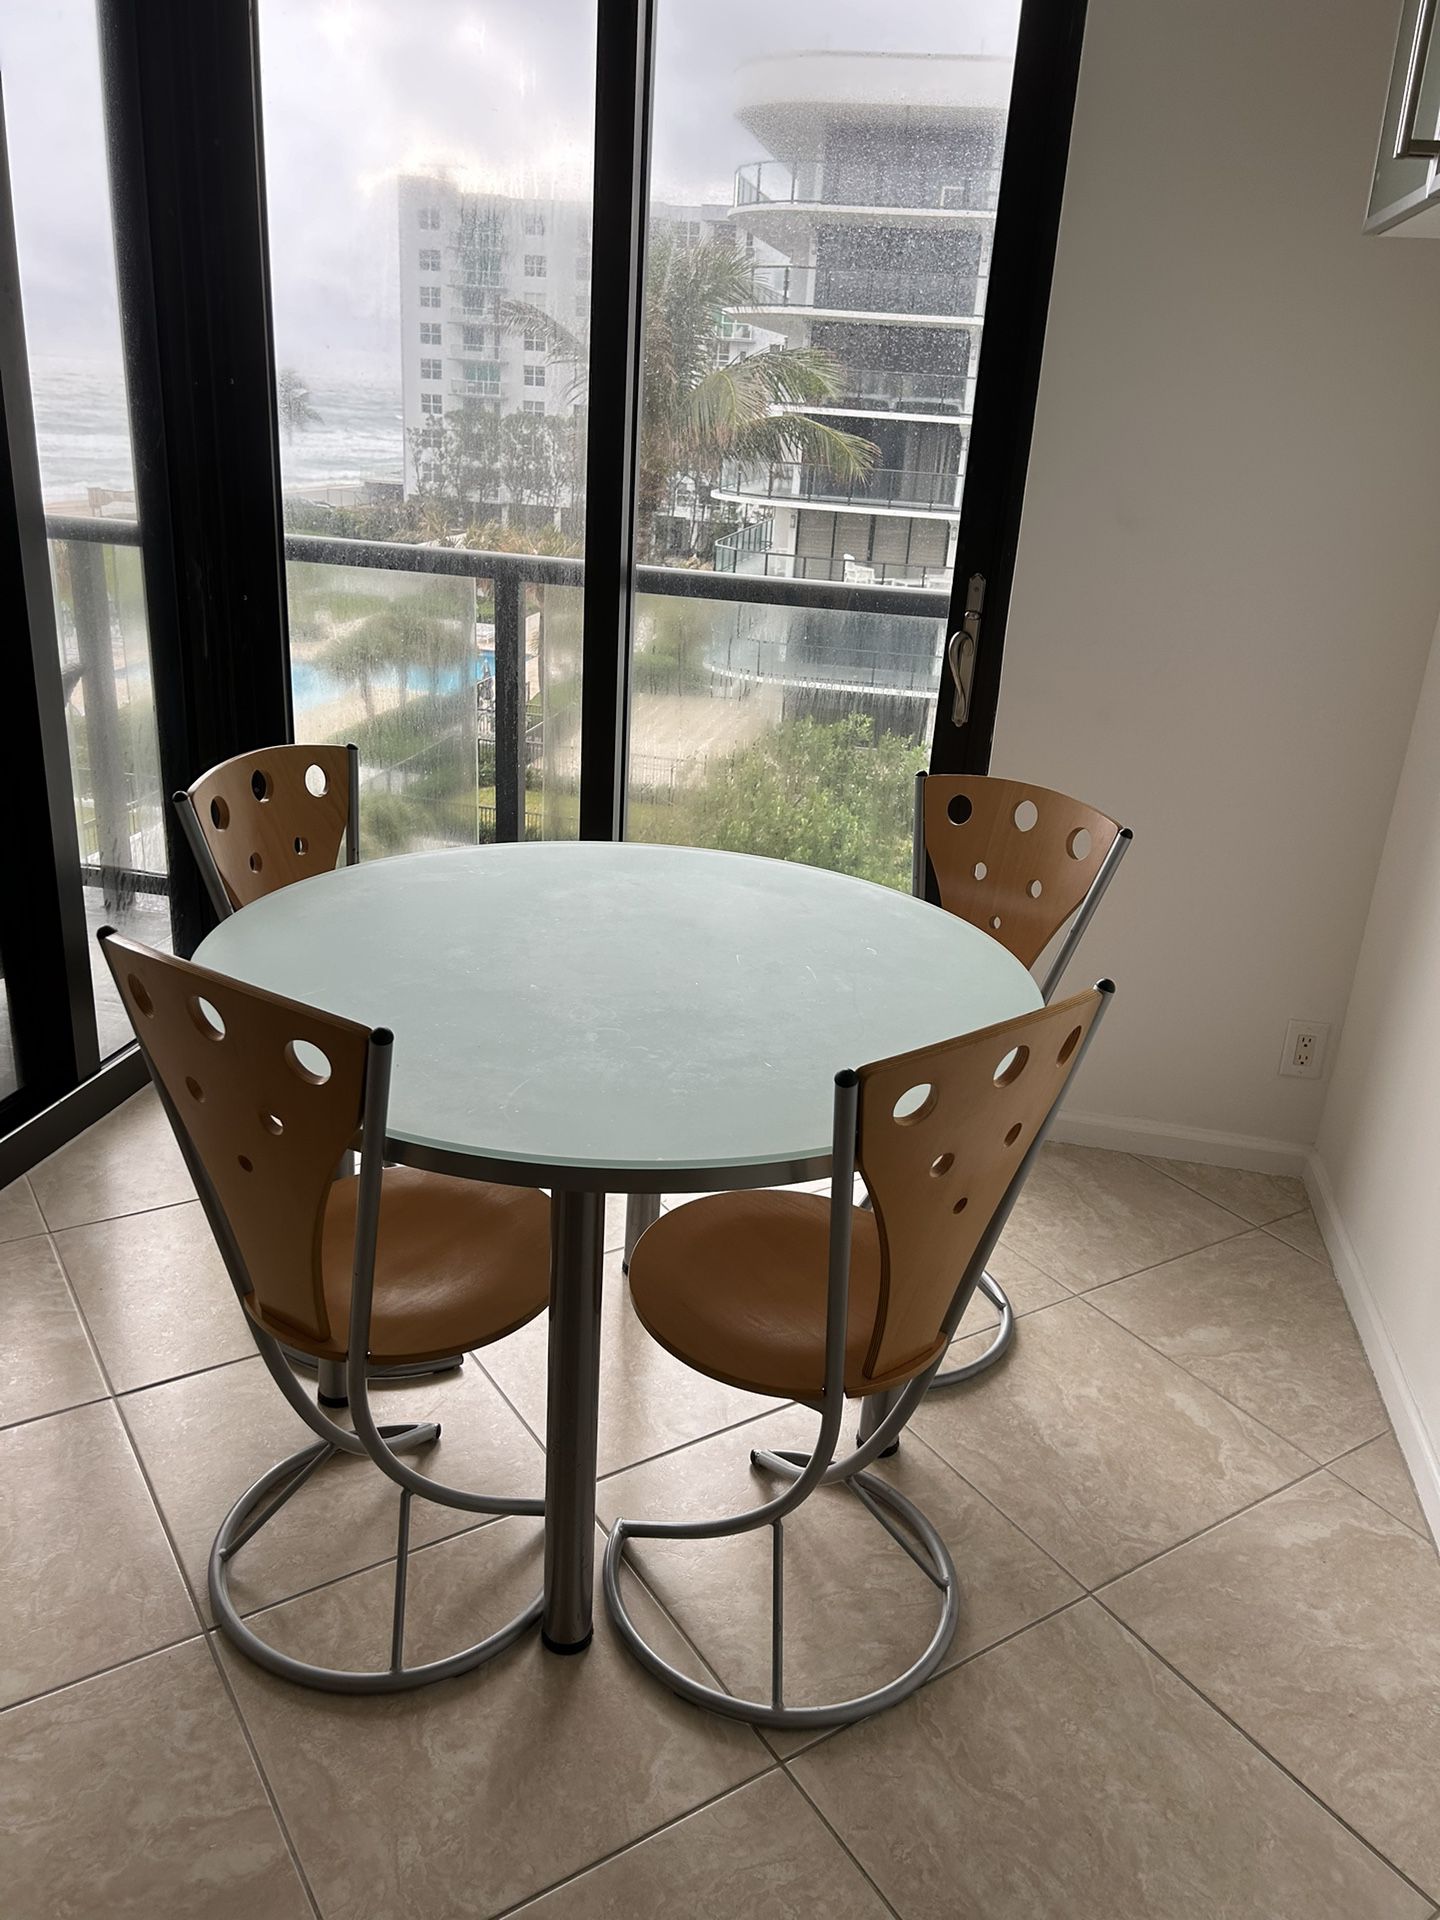 Kitchen Table and Chairs 